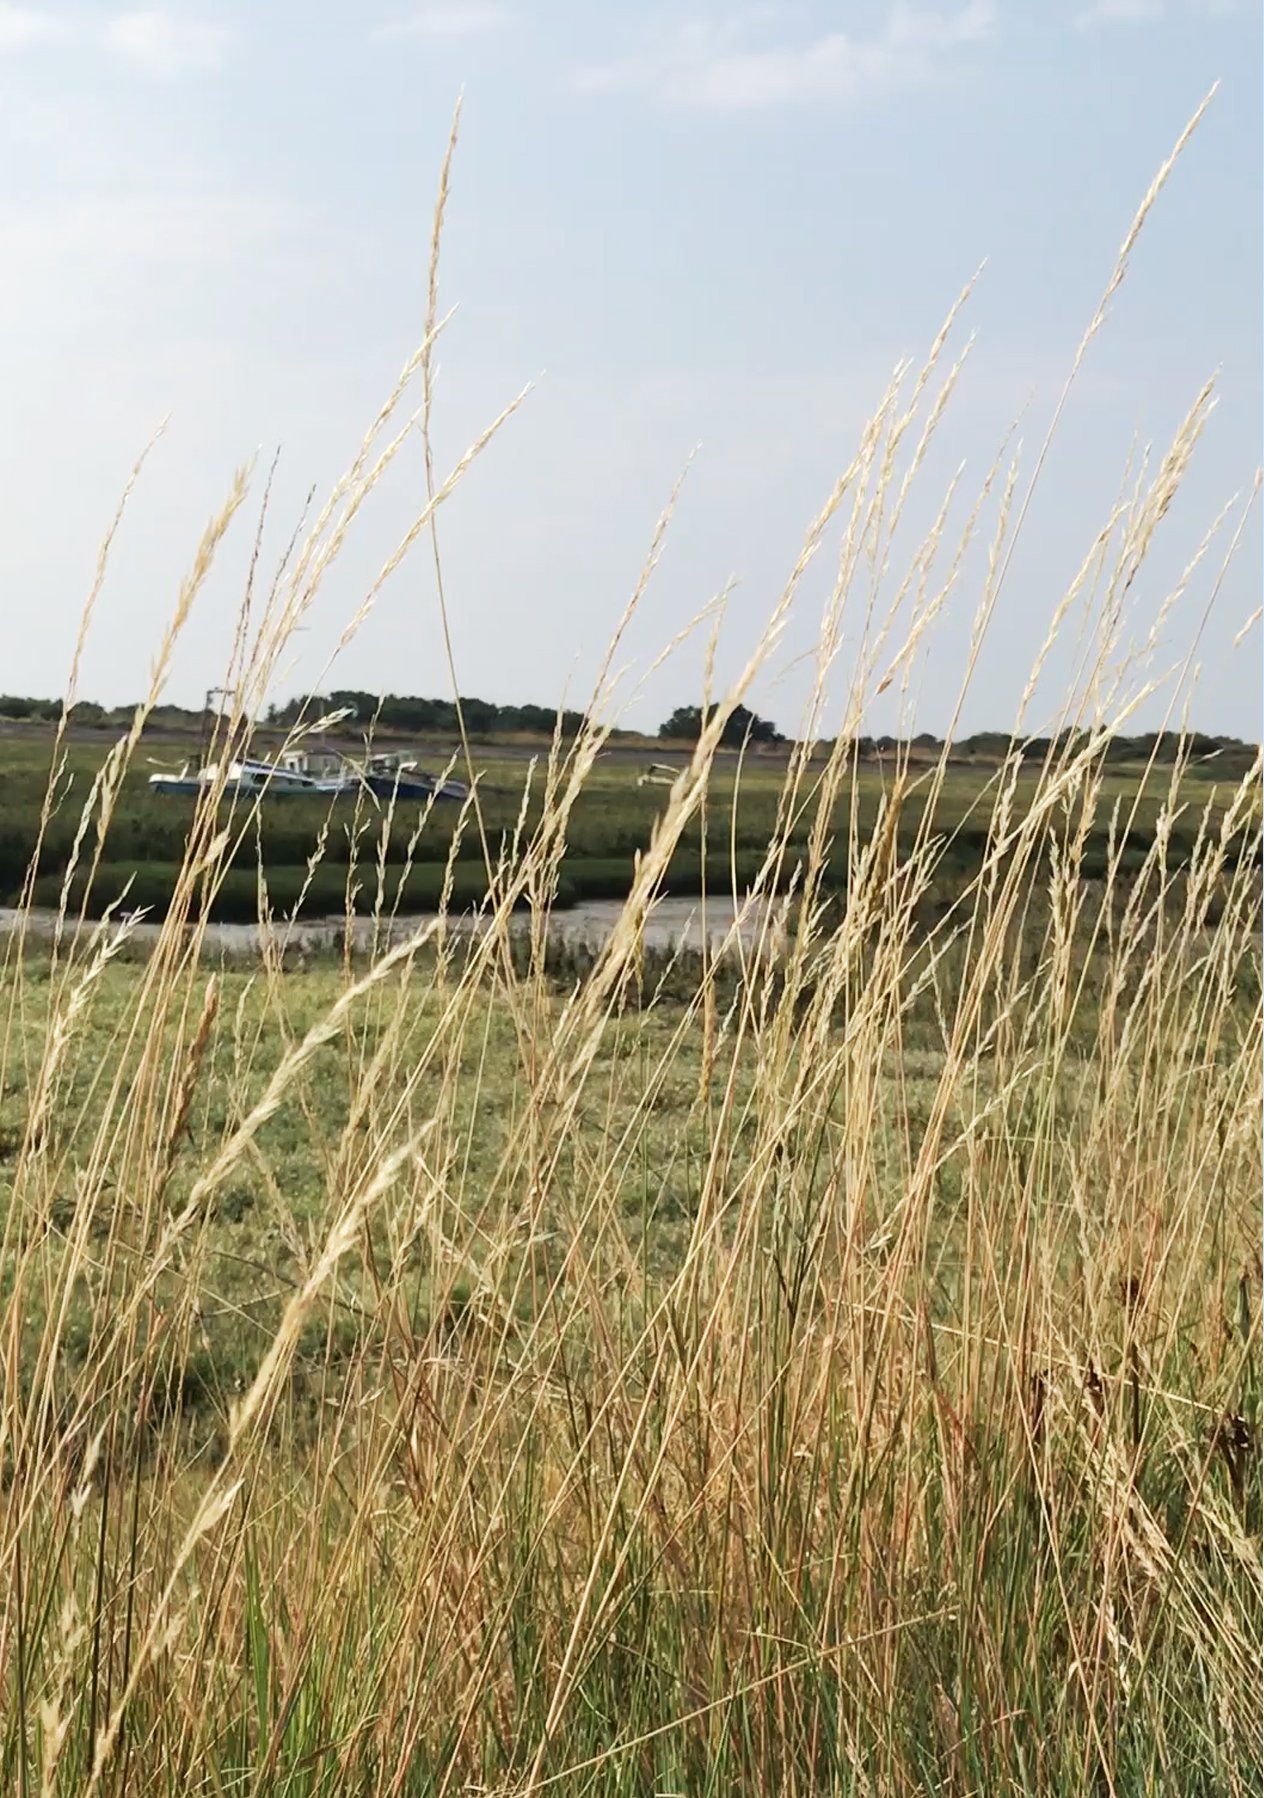 An area of dry long grass in the countryside surrounded by greenery.